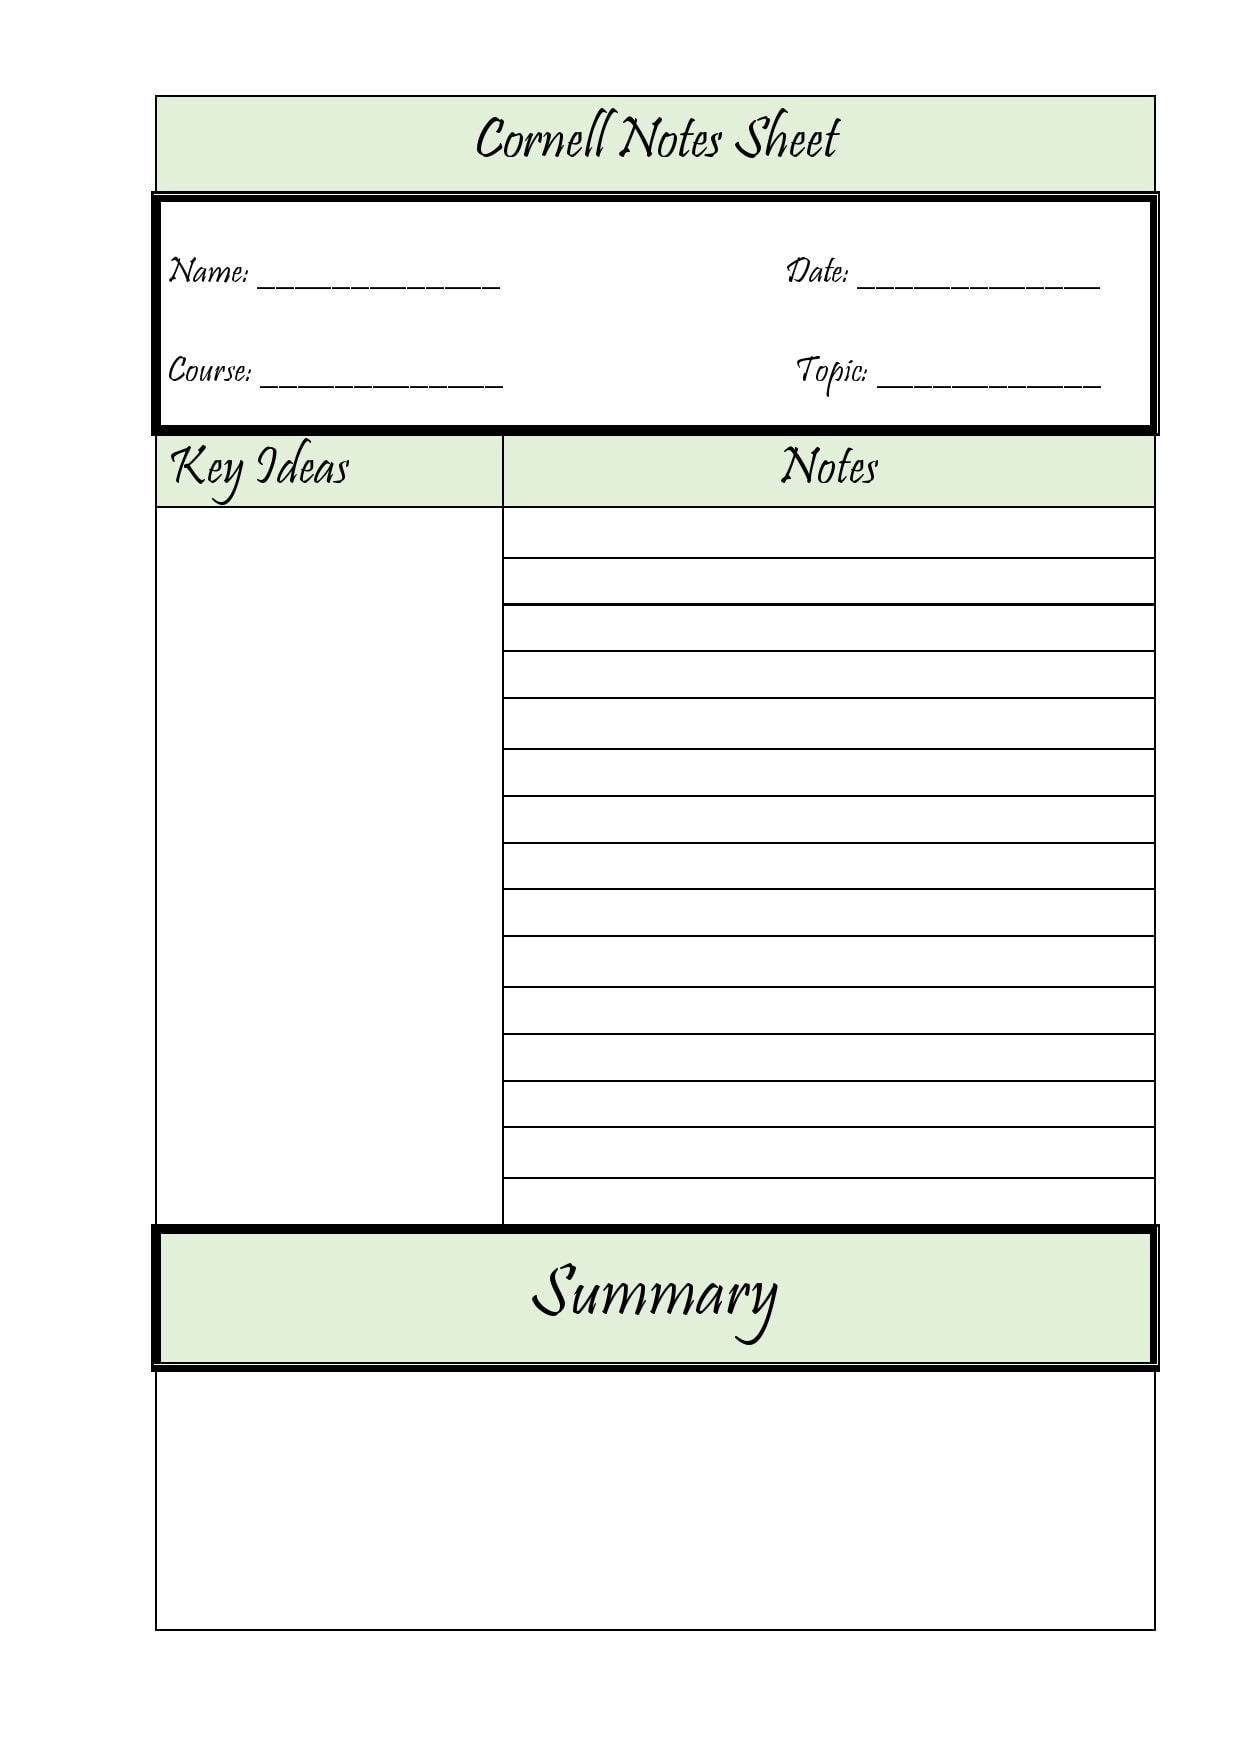 21 Printable Cornell Notes Templates [Free] - TemplateArchive Within Cornell Note Template Word